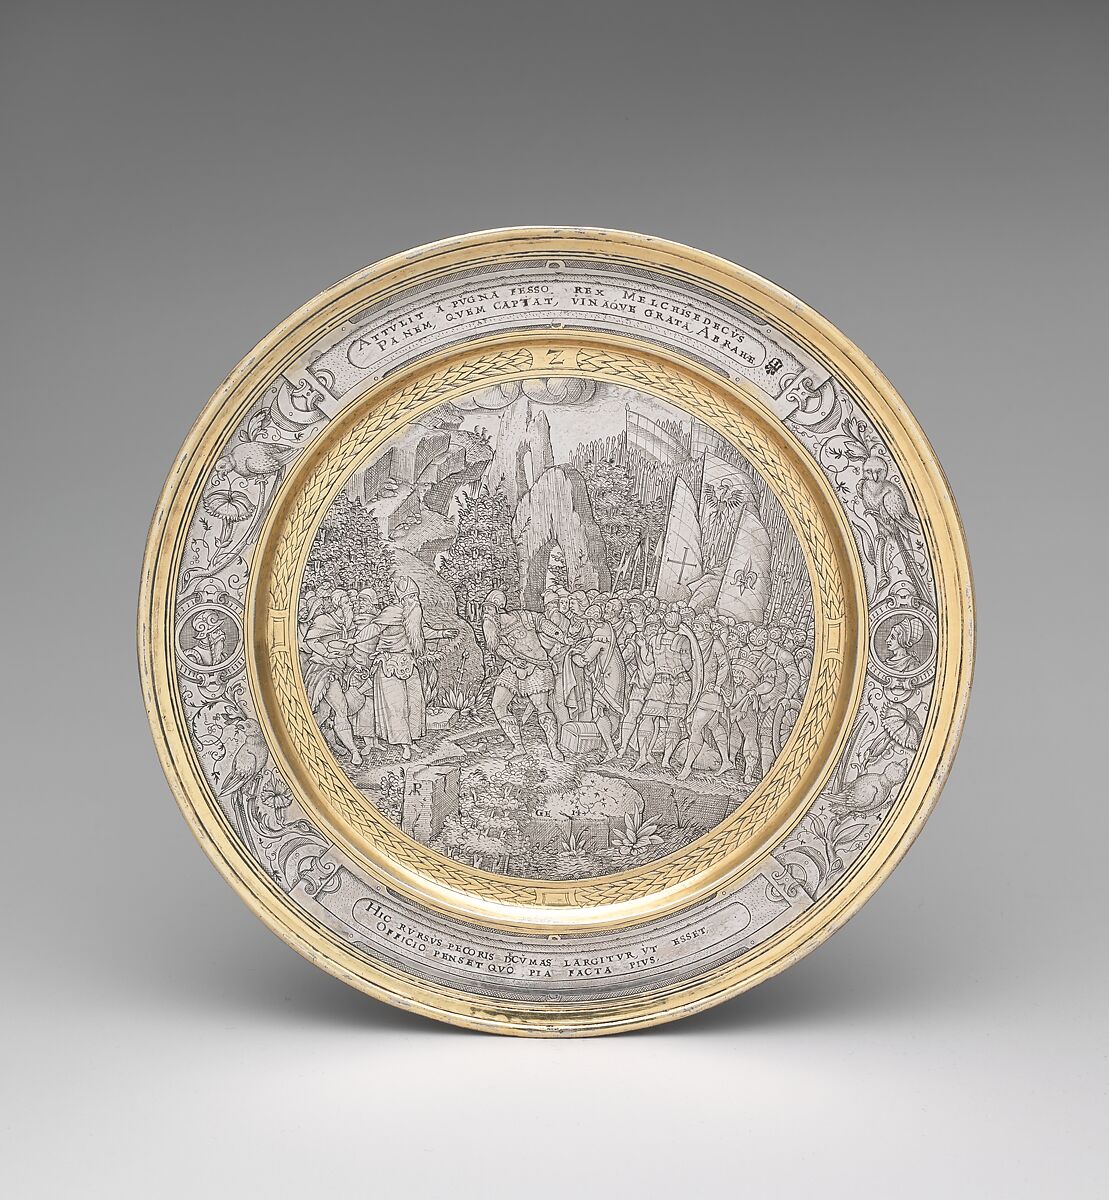 Abraham Refreshed by Melchisedek, Possibly engraved by P.M., Silver, partly gilded, probably British 